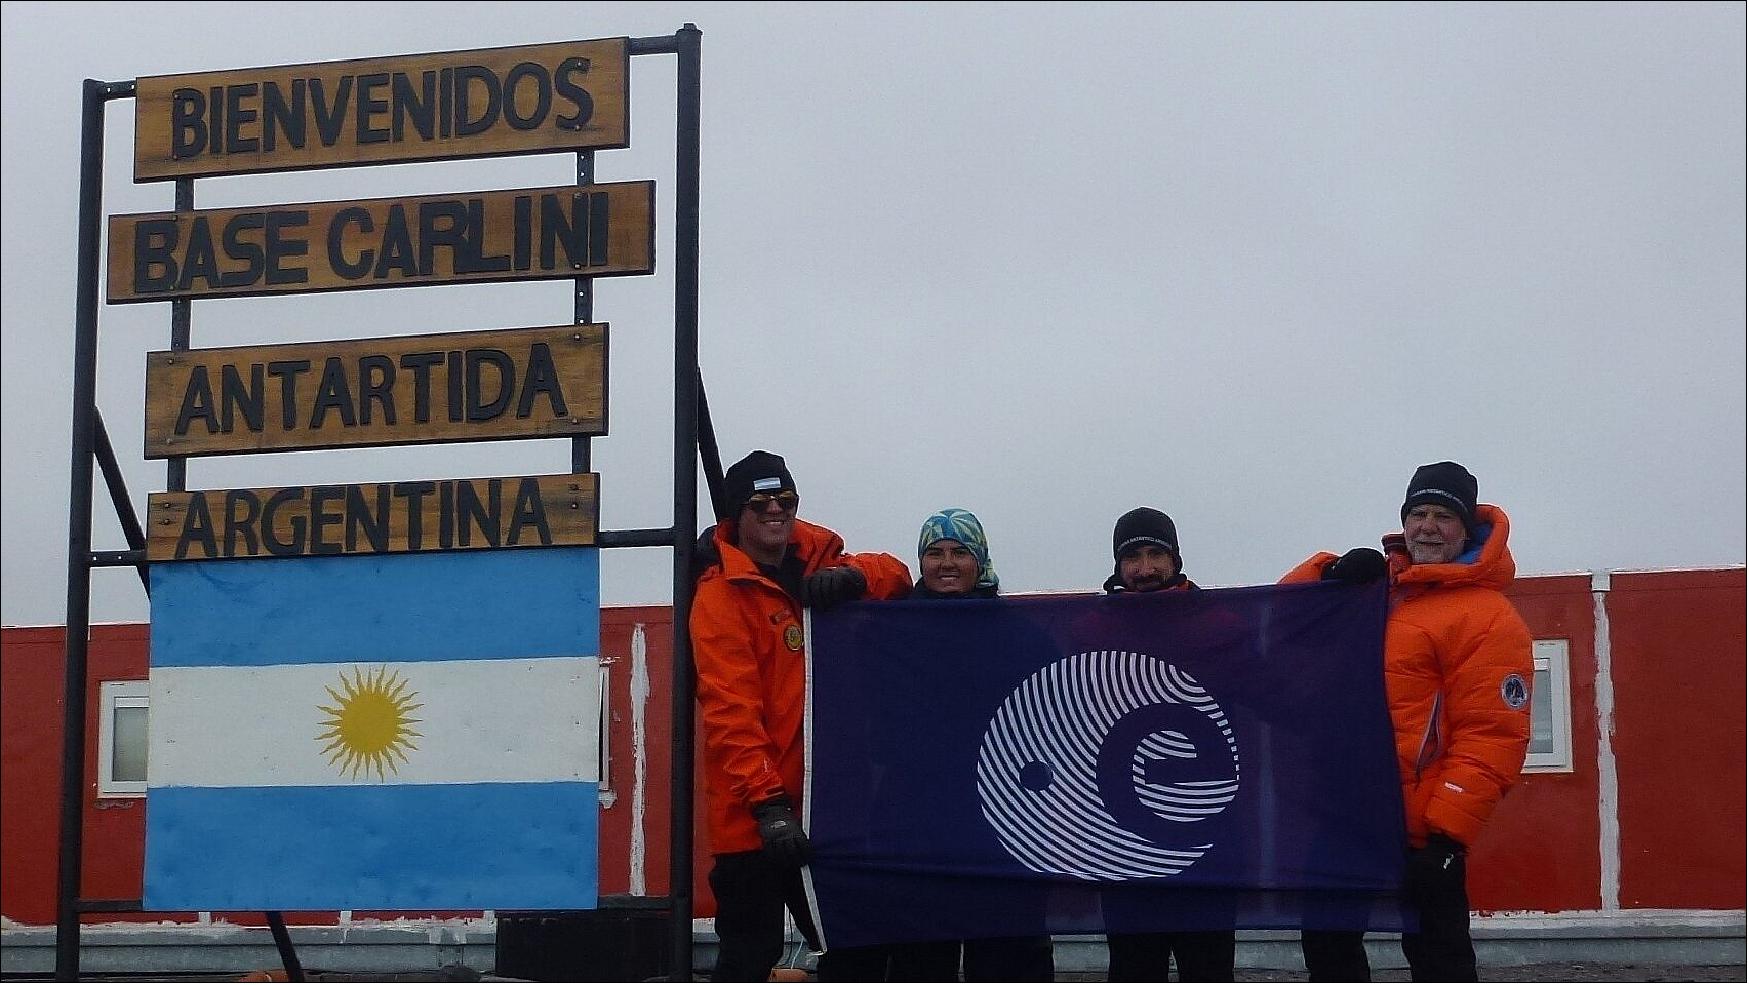 Figure 5: The ESA and Argentinian flags stand side-by-side at the Carlini base in Antarctica where teams are testing the Tempus Pro telemedicine device (photo credit: ESA)